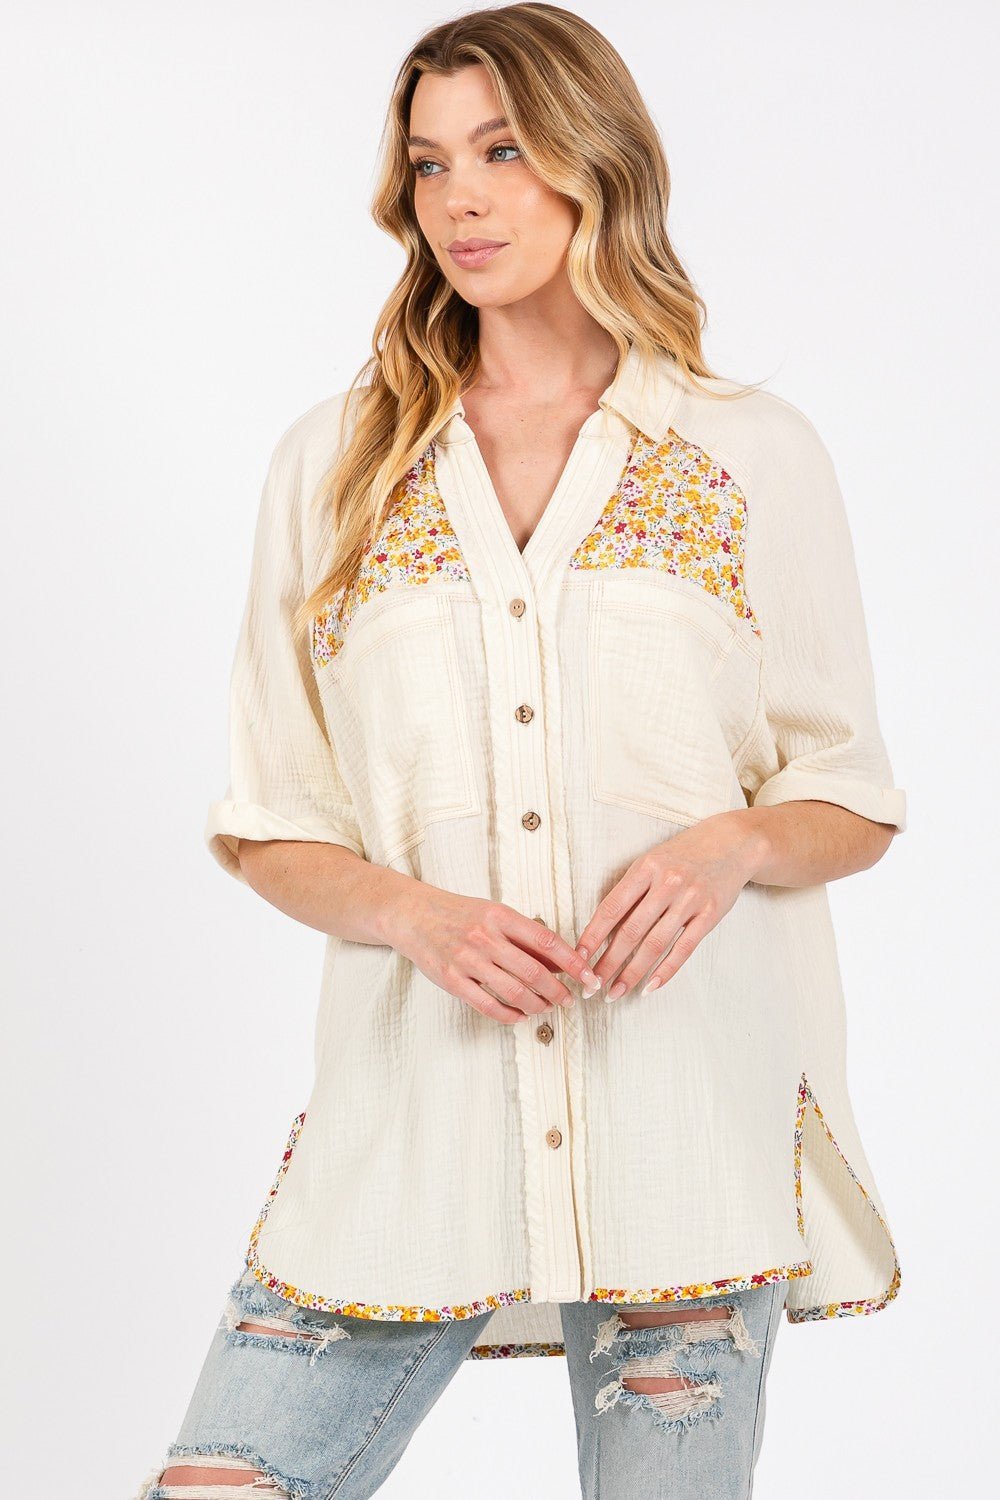 Floral Detail Button Up Short Sleeve Shirt in IvoryShirtSAGE+FIG